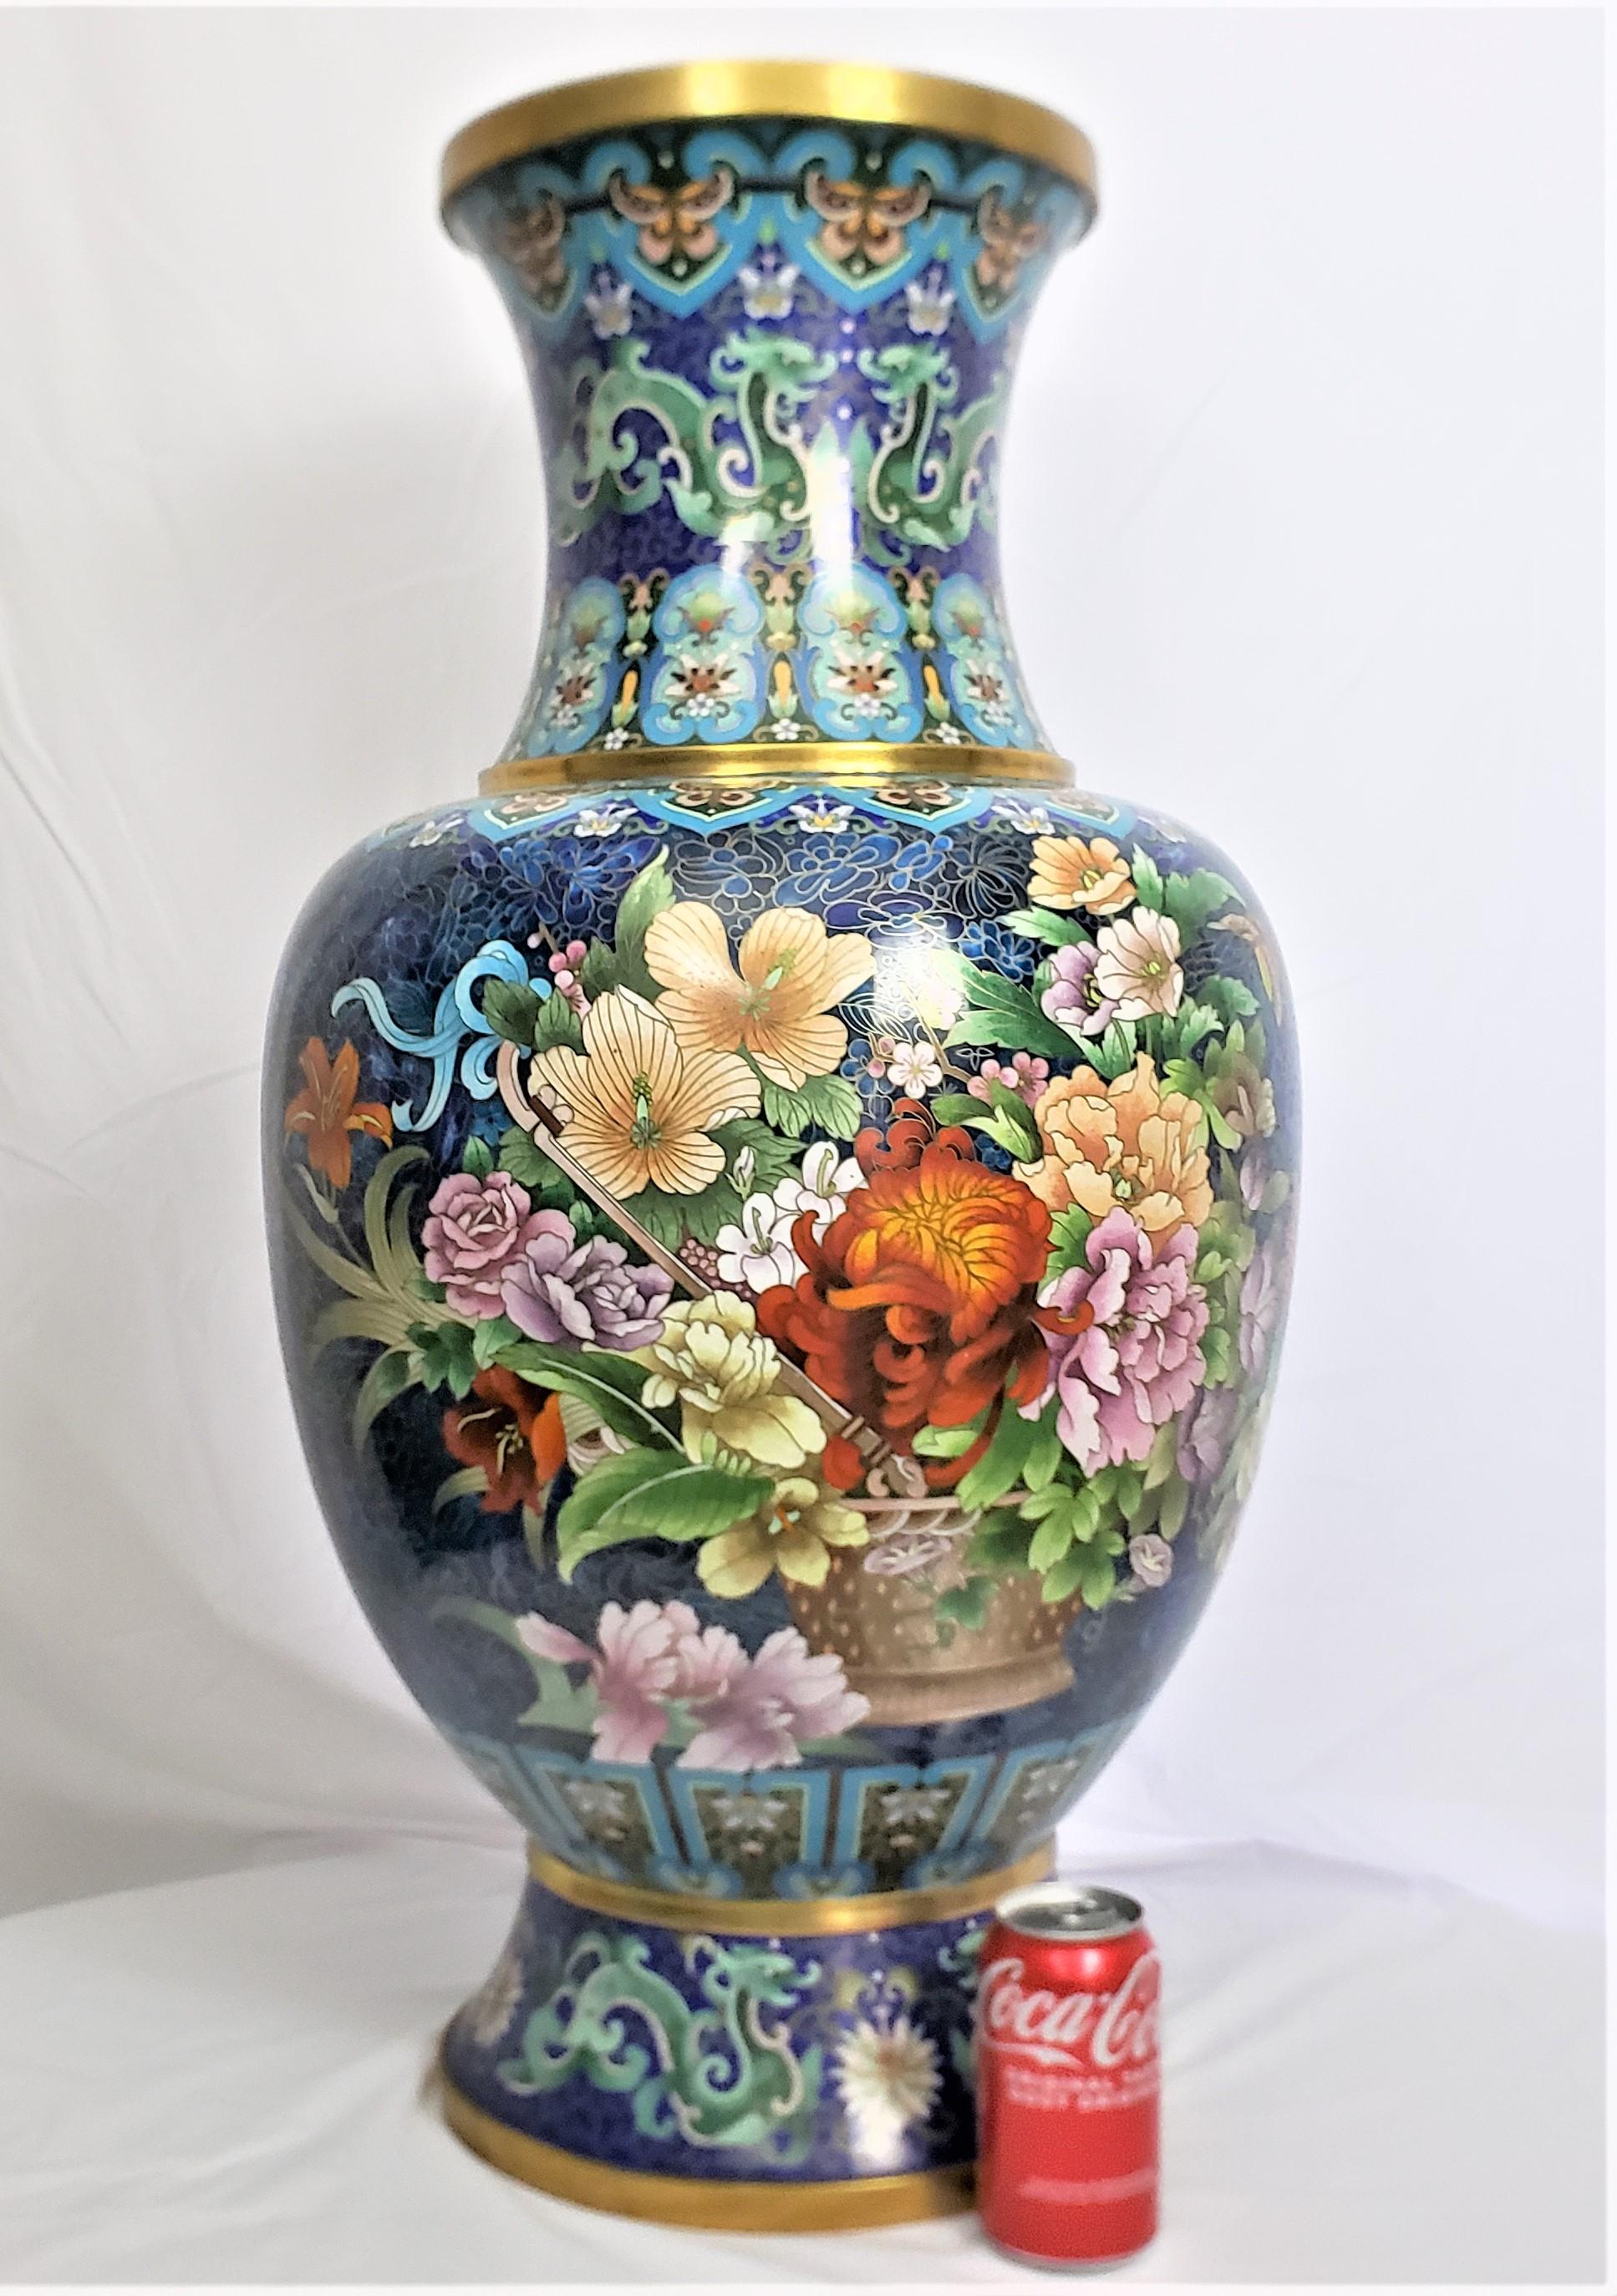 Huge Mid 20th Century Chinese Cloisonne Vase with Ornate Floral Decoration 10